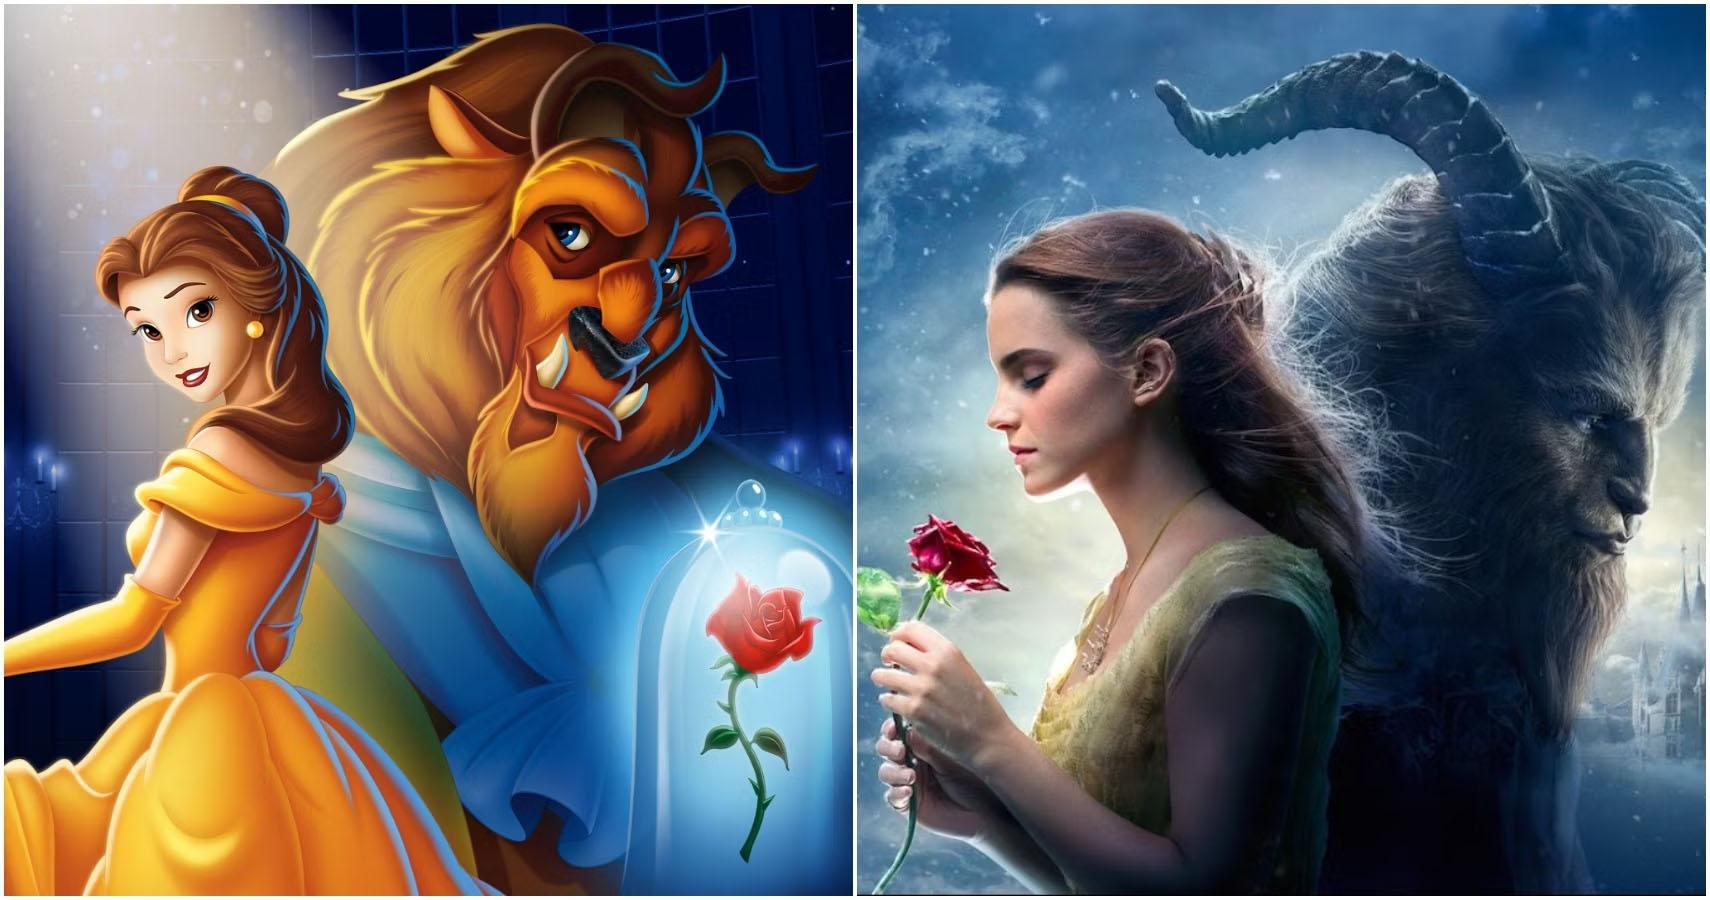 Beauty and the Beast Animated and Live Action 4K UHD Movie for $7.99